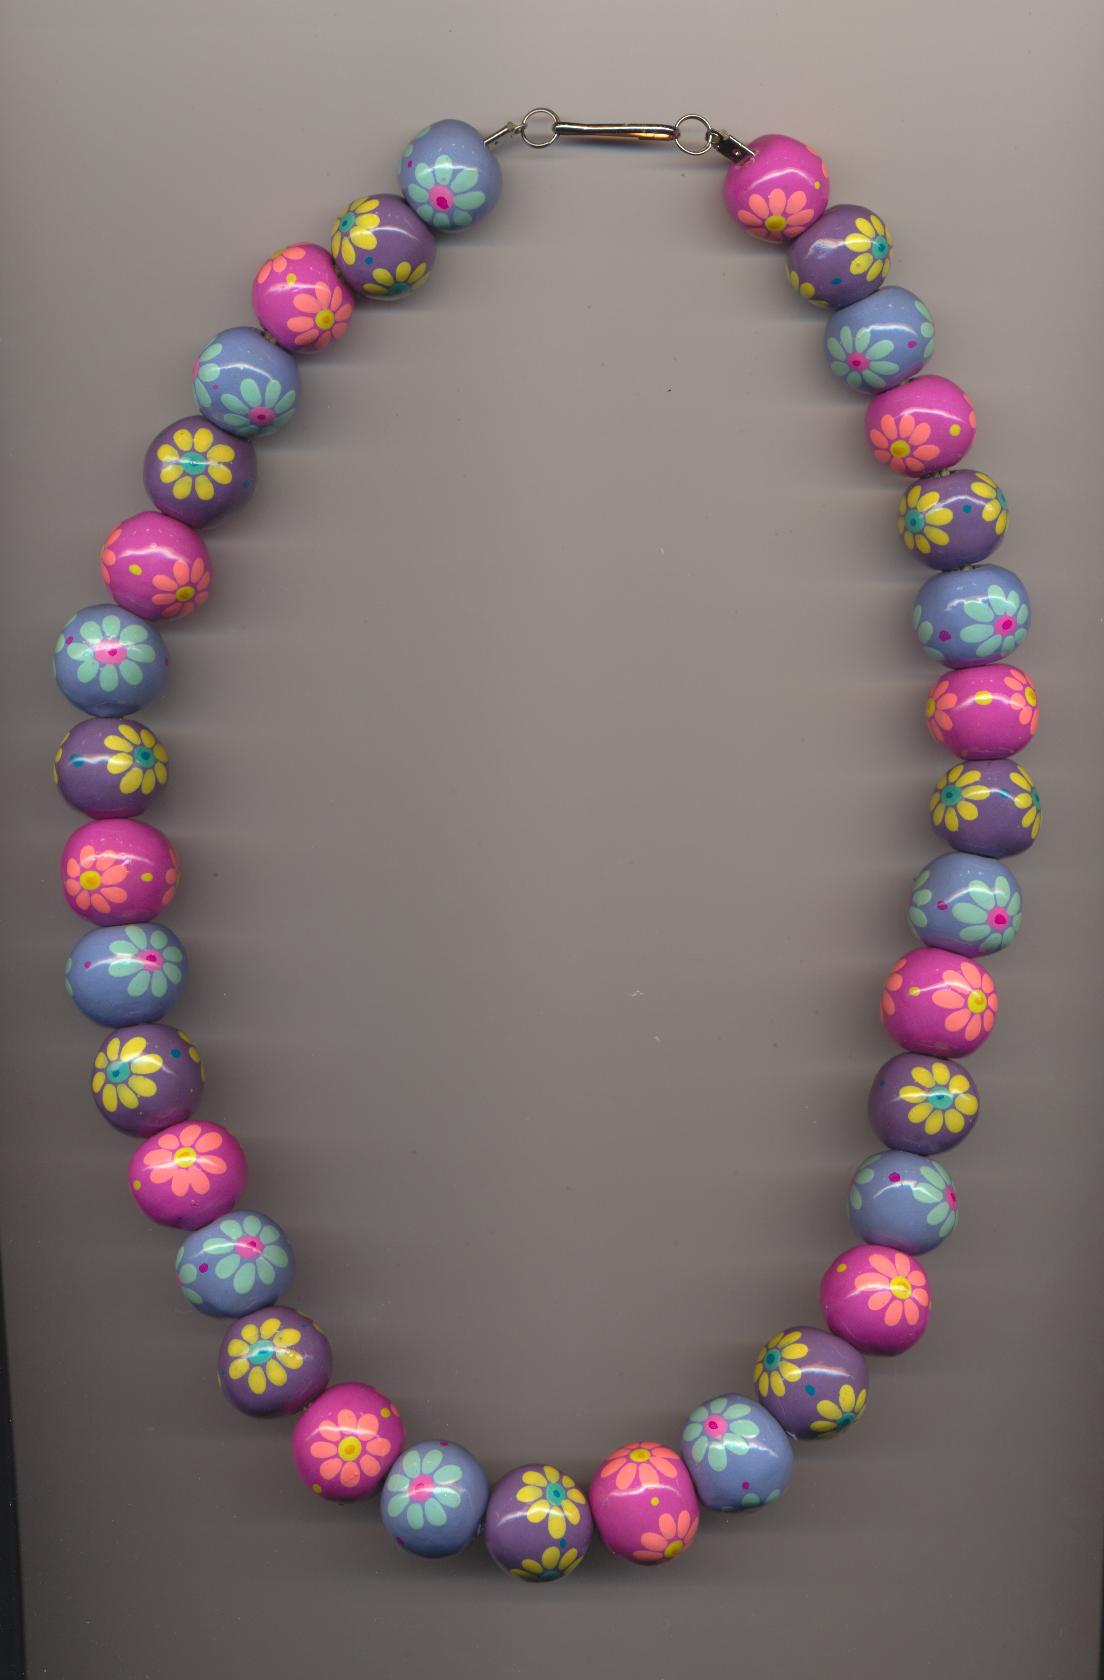 Necklace made of big hand painted clay beads, Tbilisi Georgia, 2010, length 30'' 60cm.